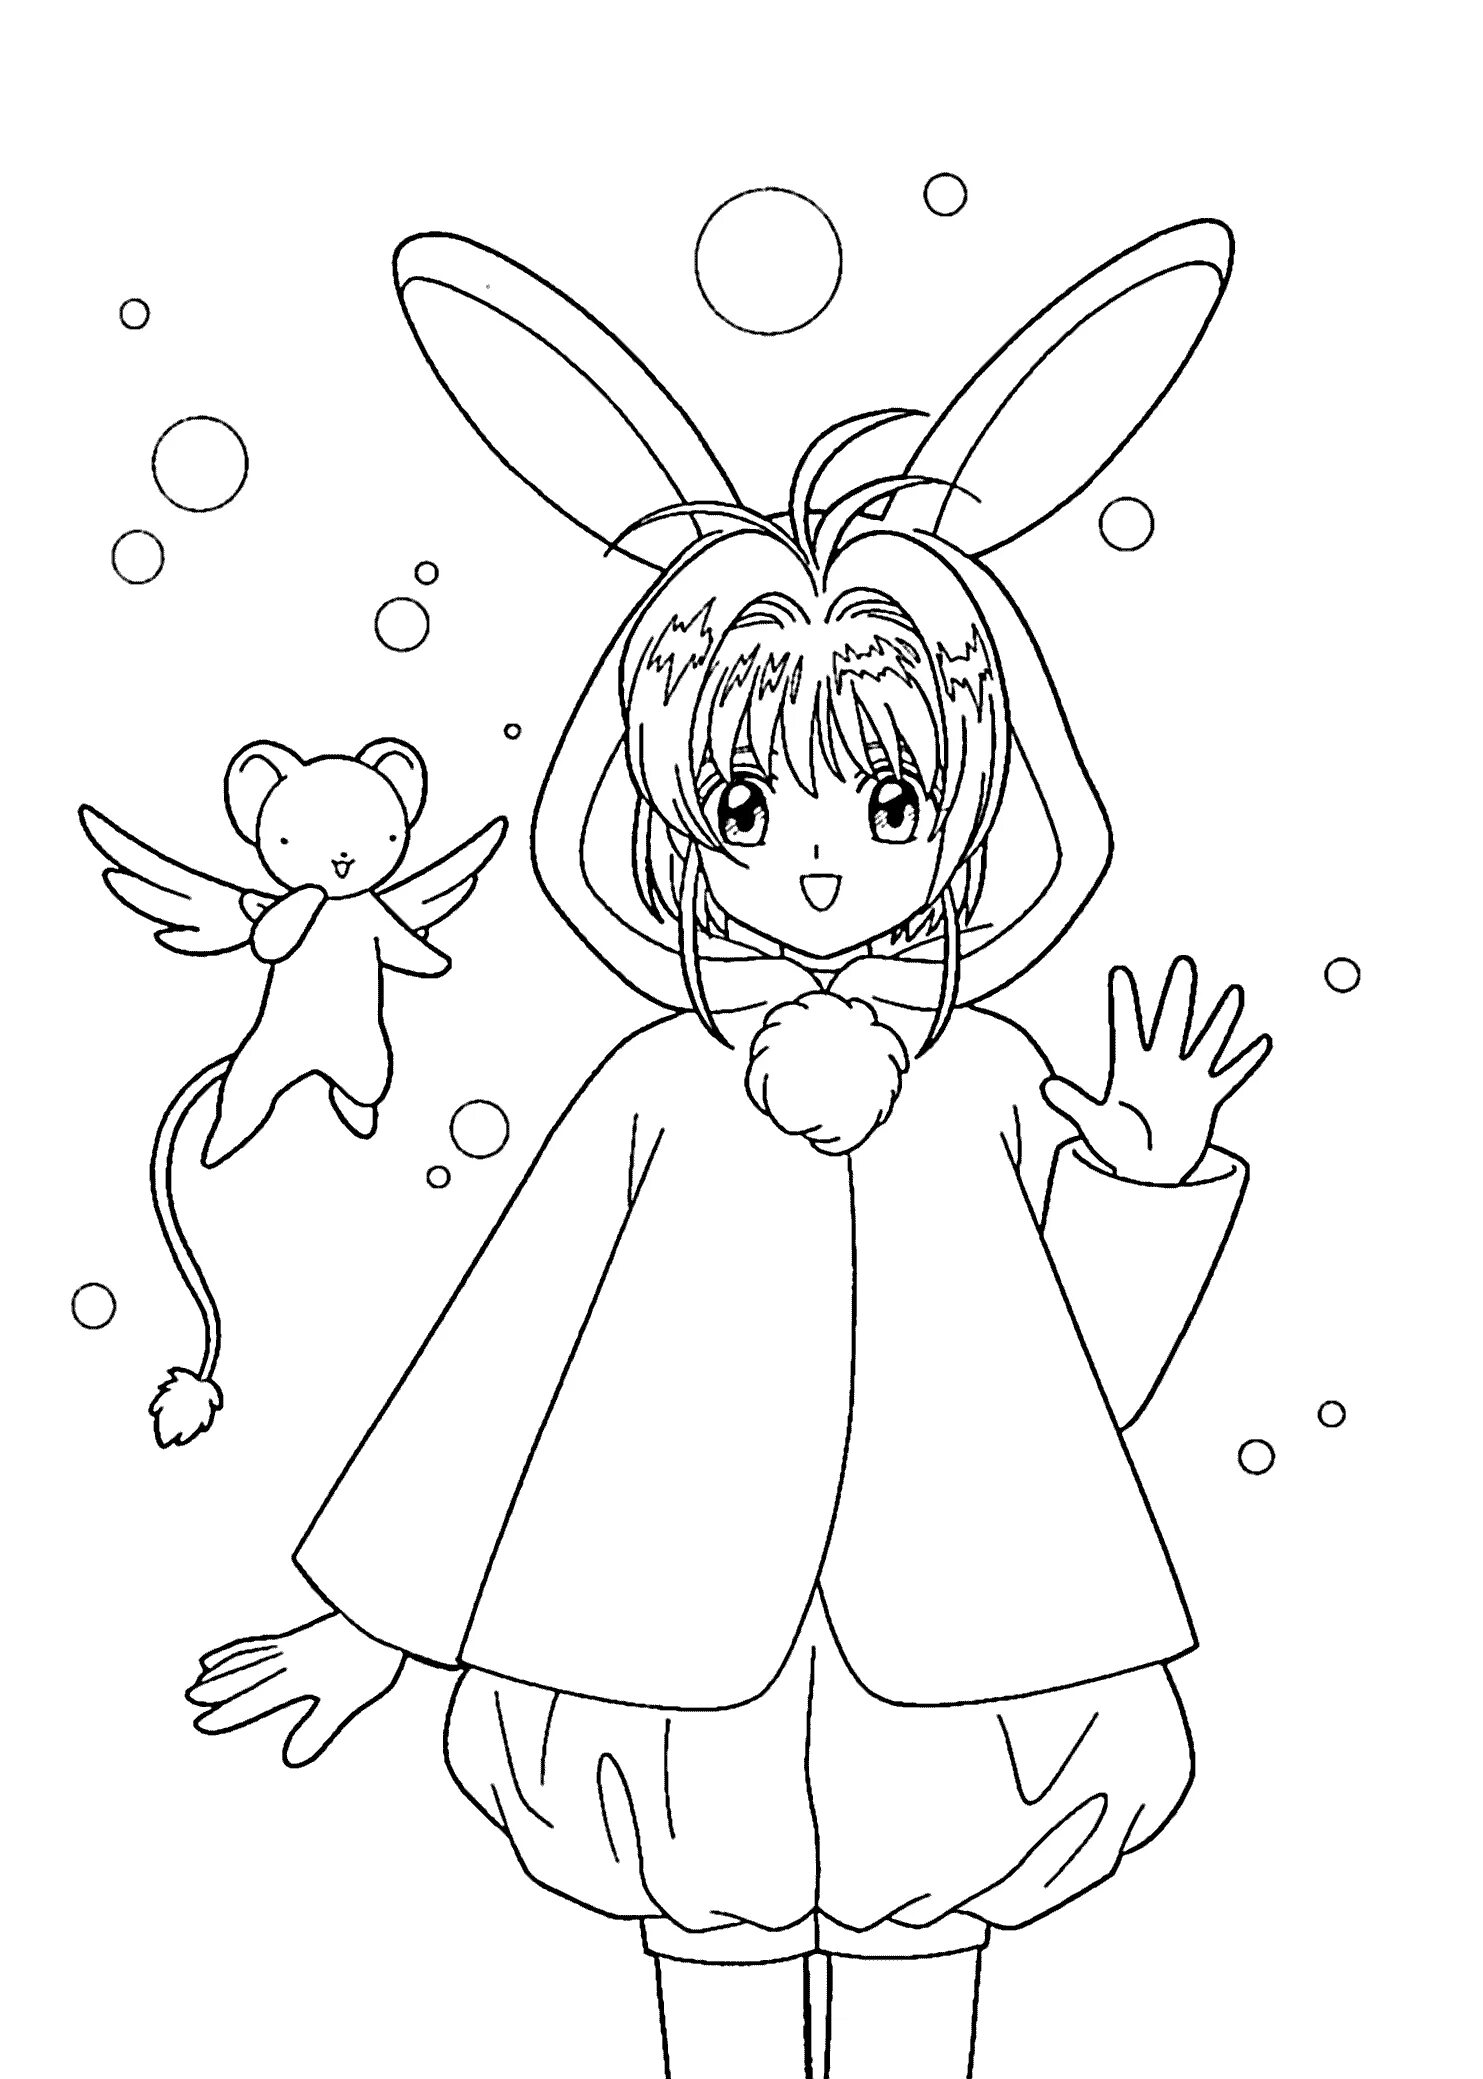 Fantastic anime rabbit coloring page